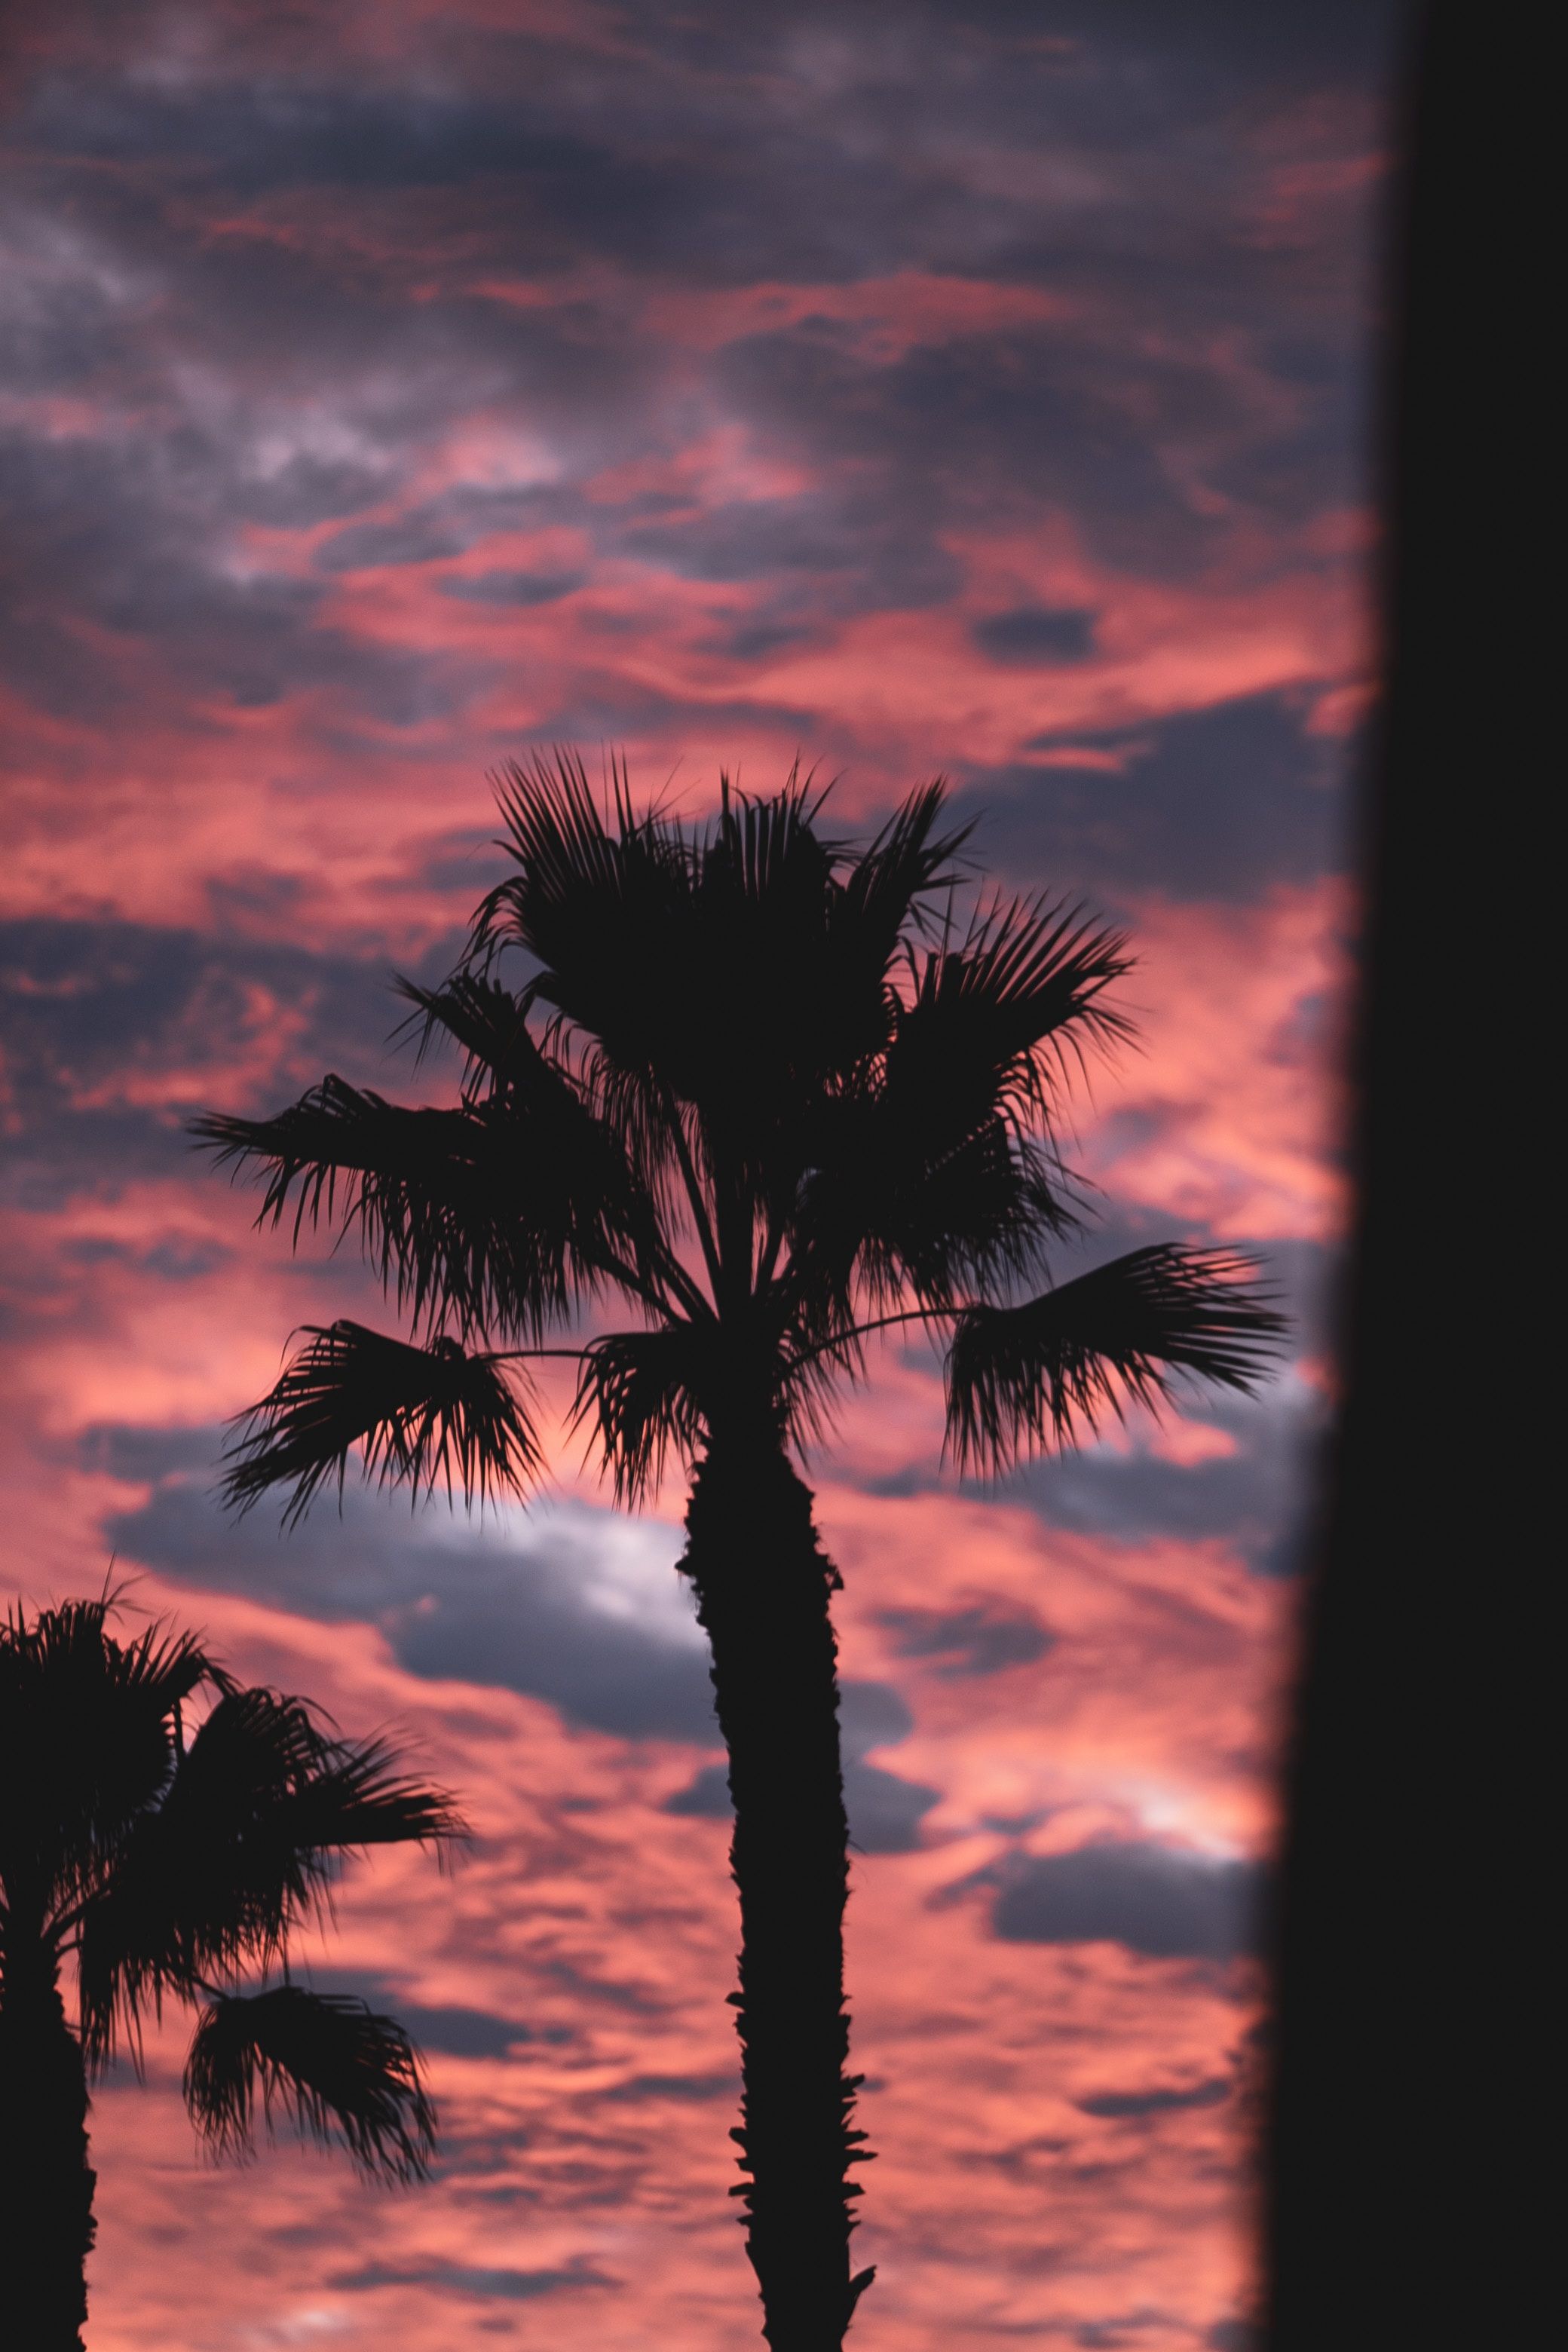 A palm tree with the sun setting behind it - Palm tree